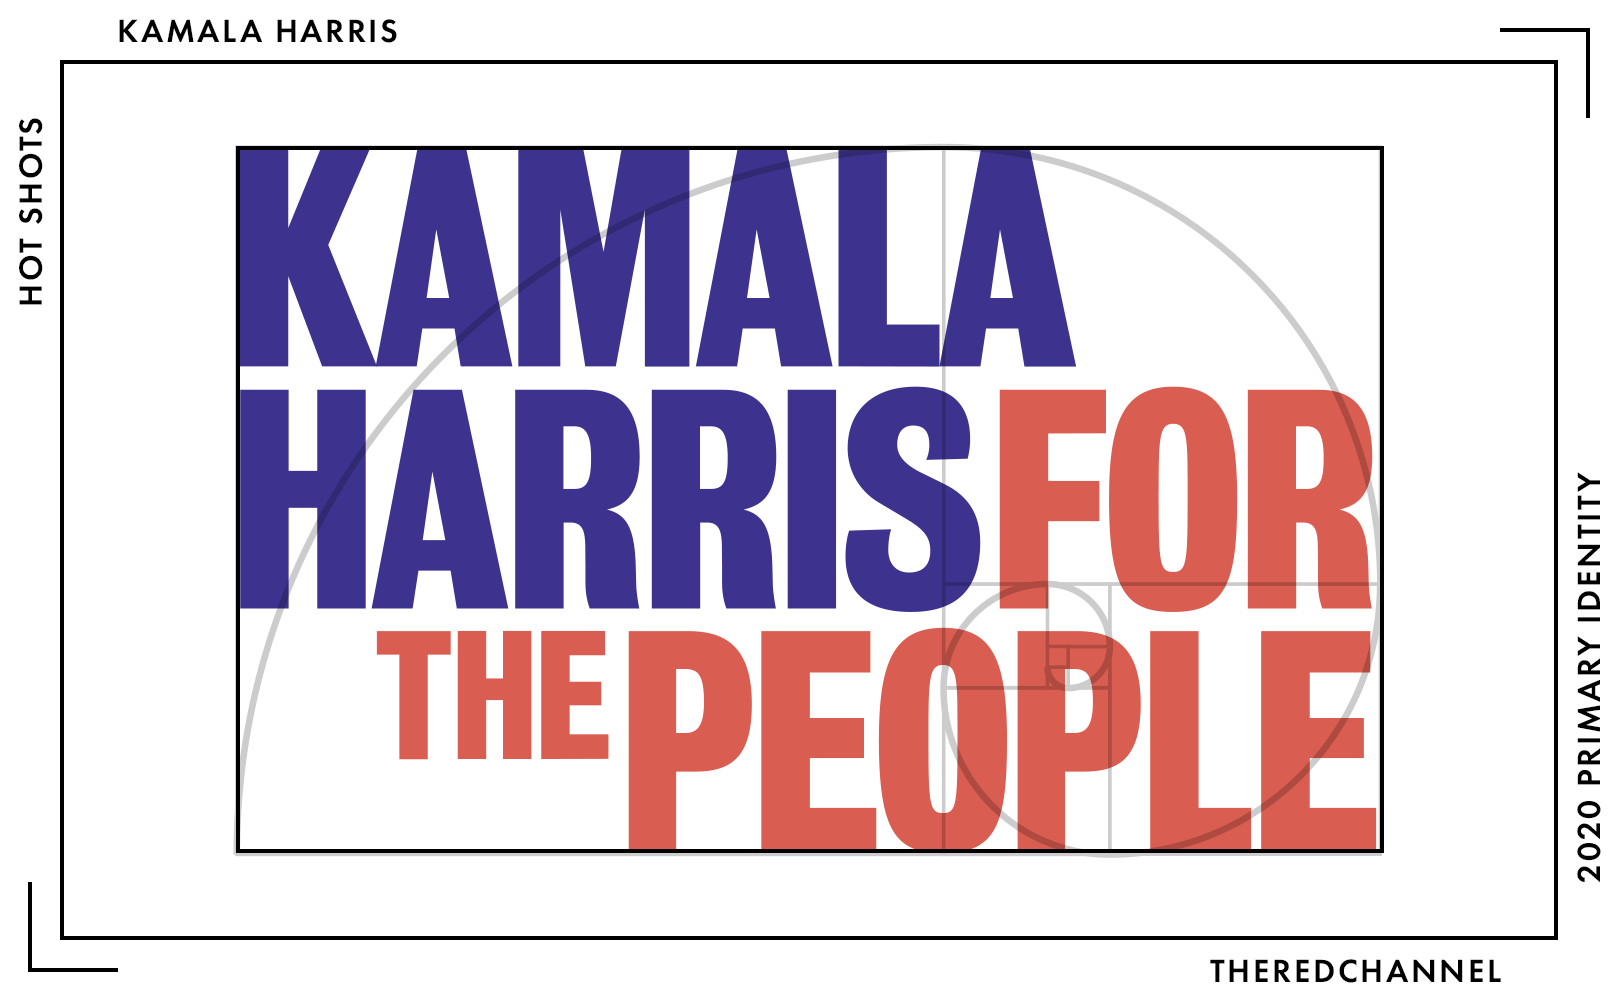 Harris 2020 Proportions